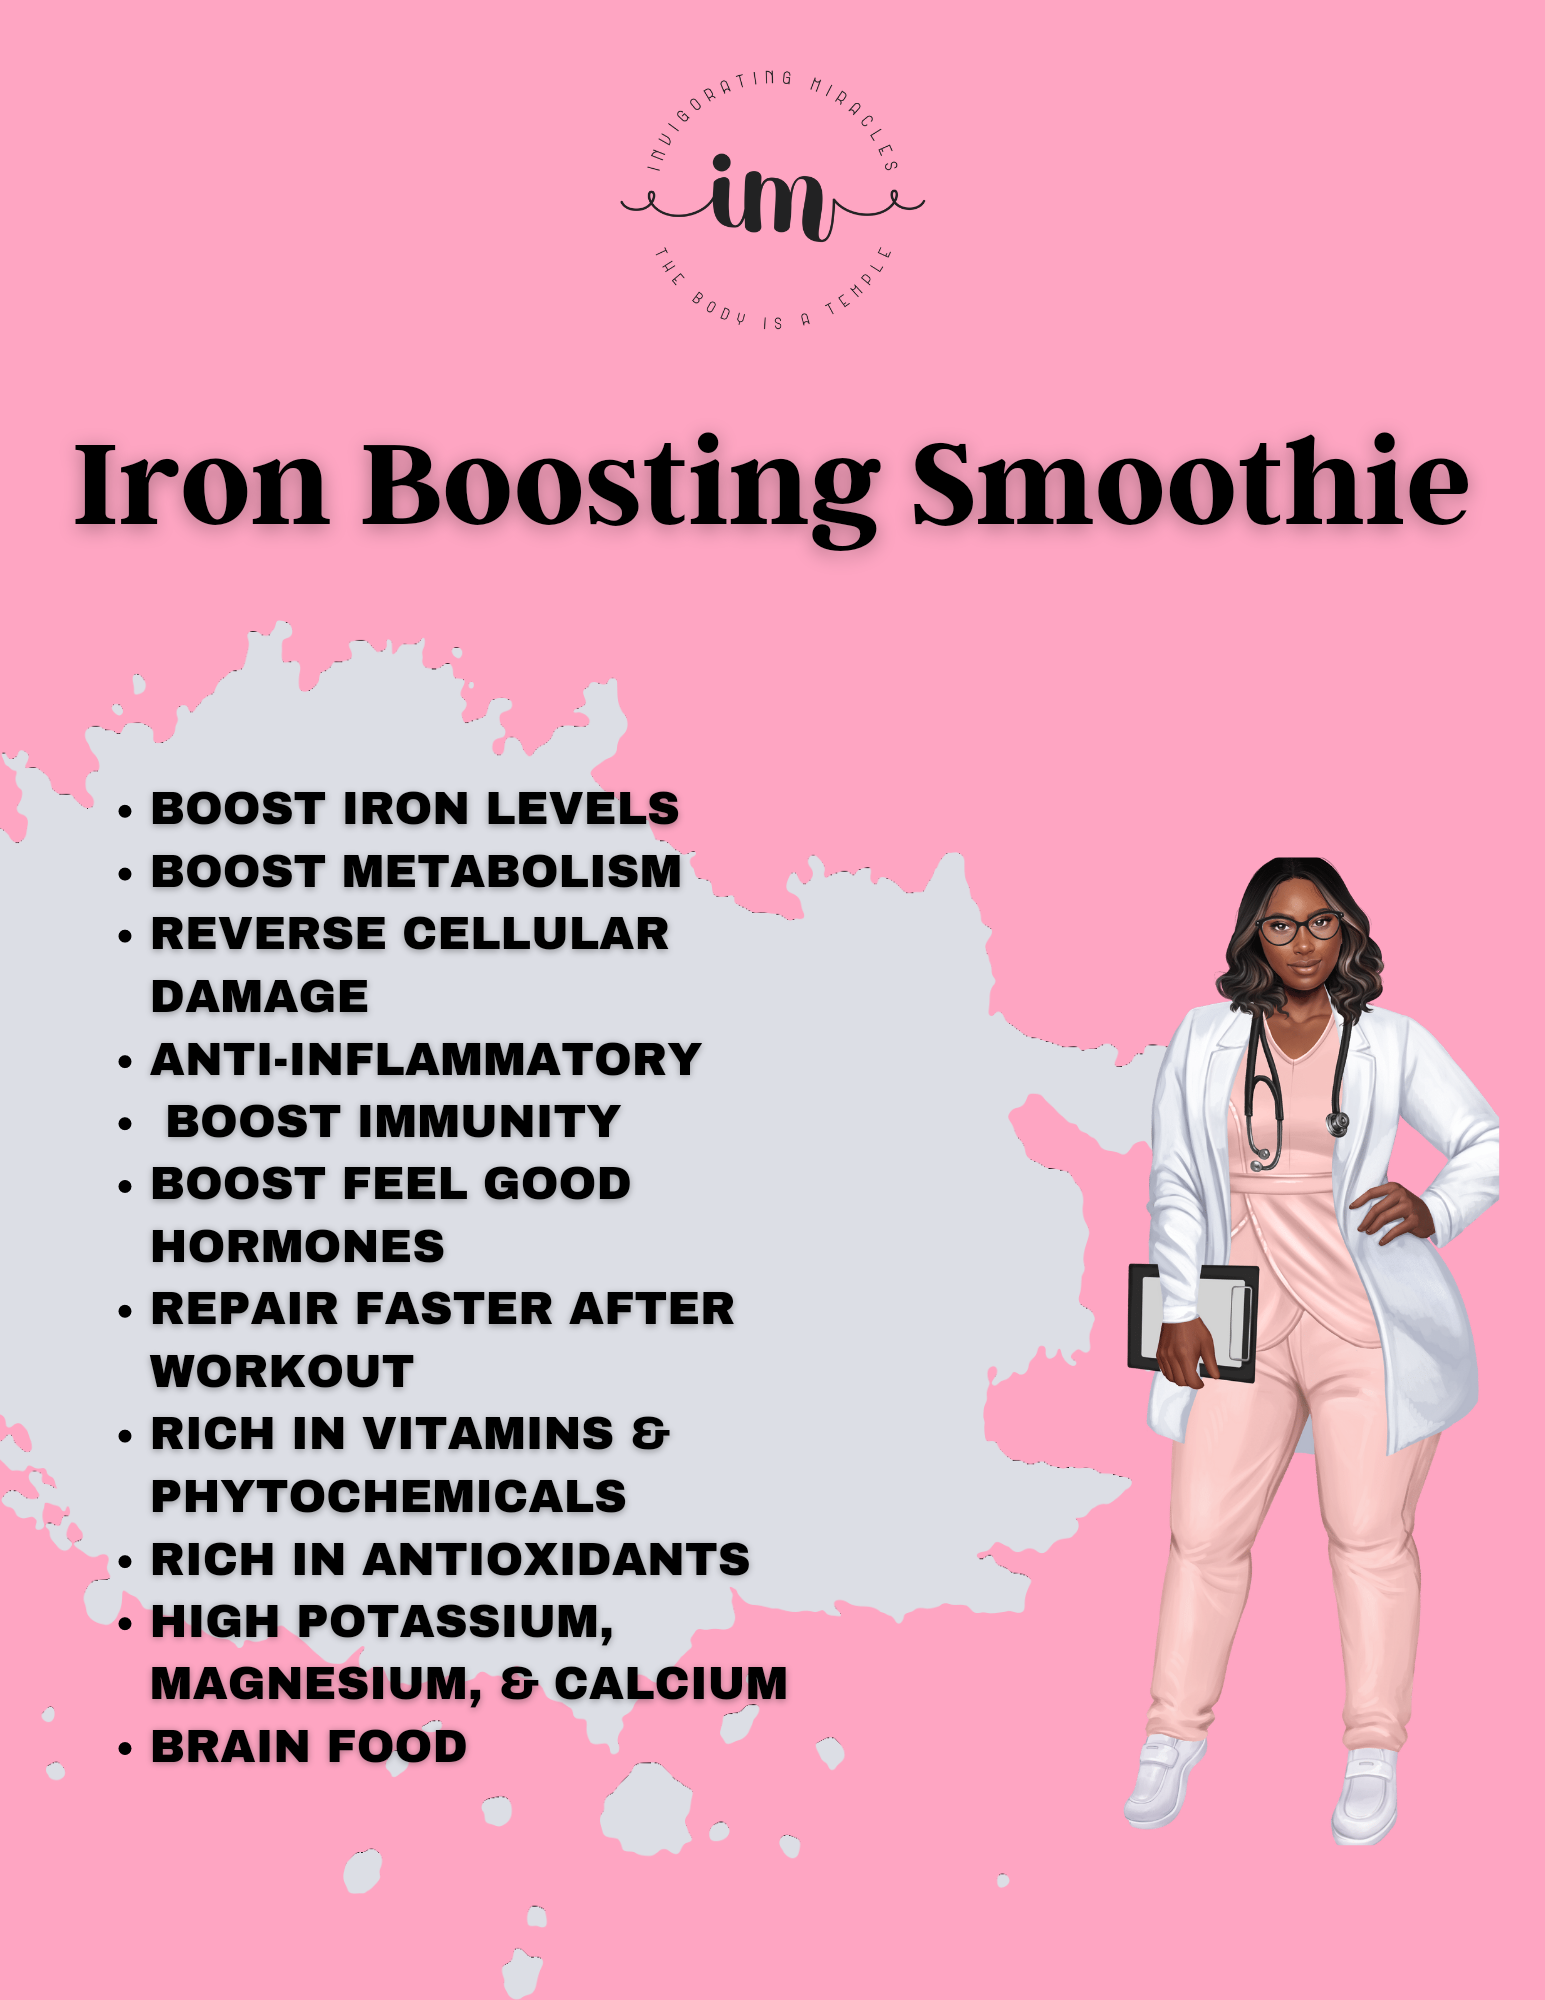 Iron boosting prescription smoothie recipe by Shamara Daniels Natural Health Consultant owner of Invigorating Miracles LLC